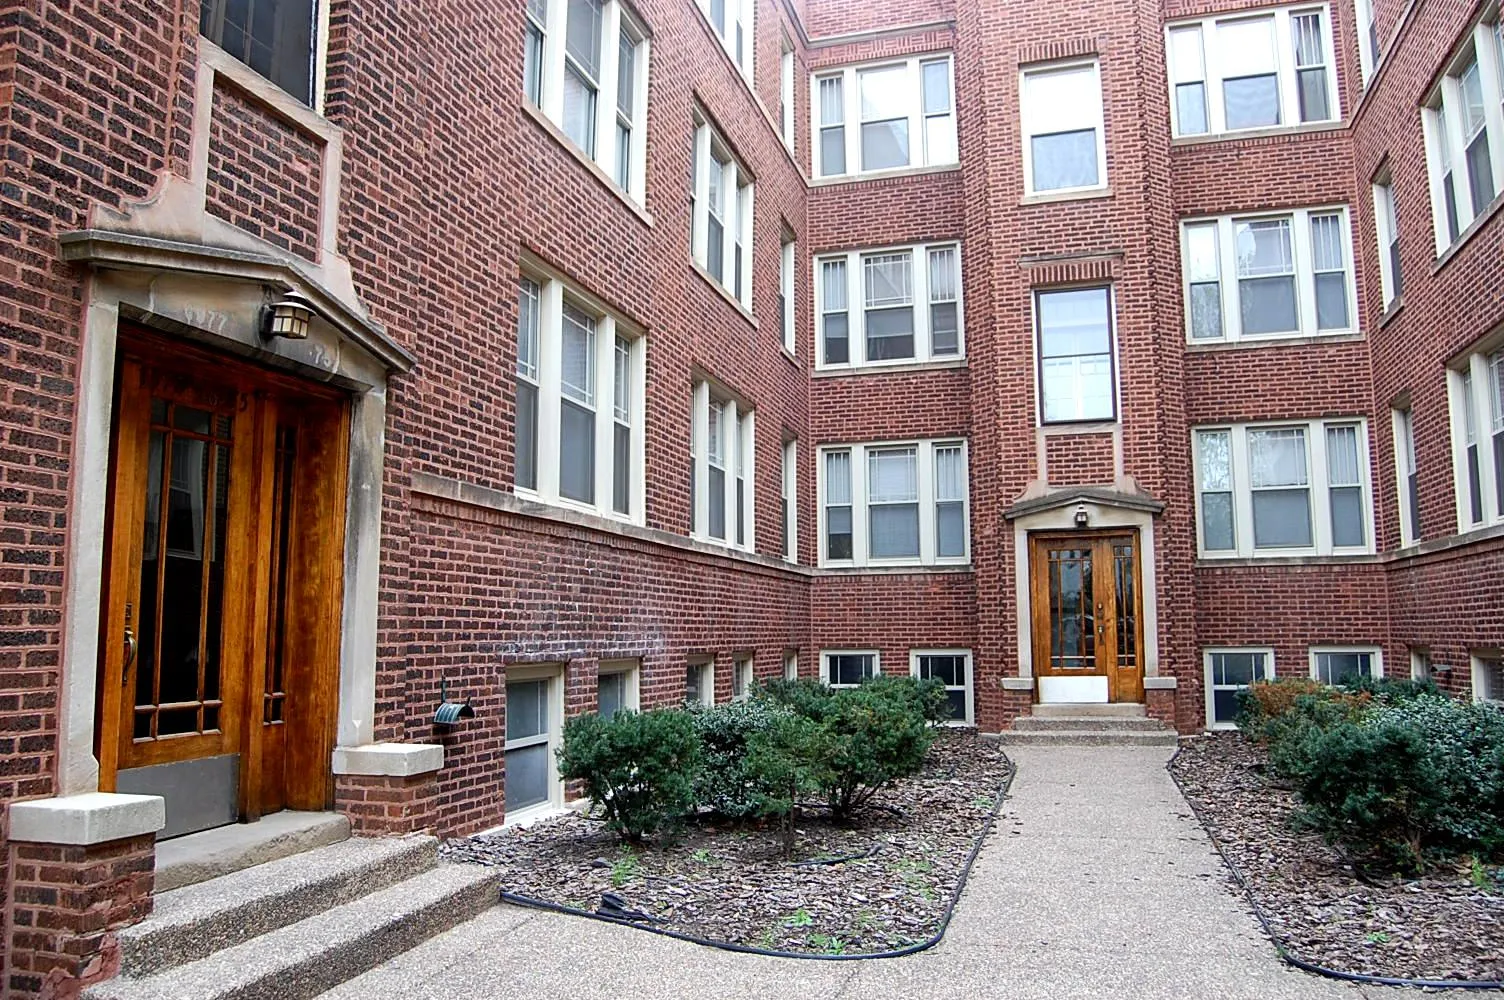 6975 N Bell Ave 60645 60645-unit#1-Chicago-IL